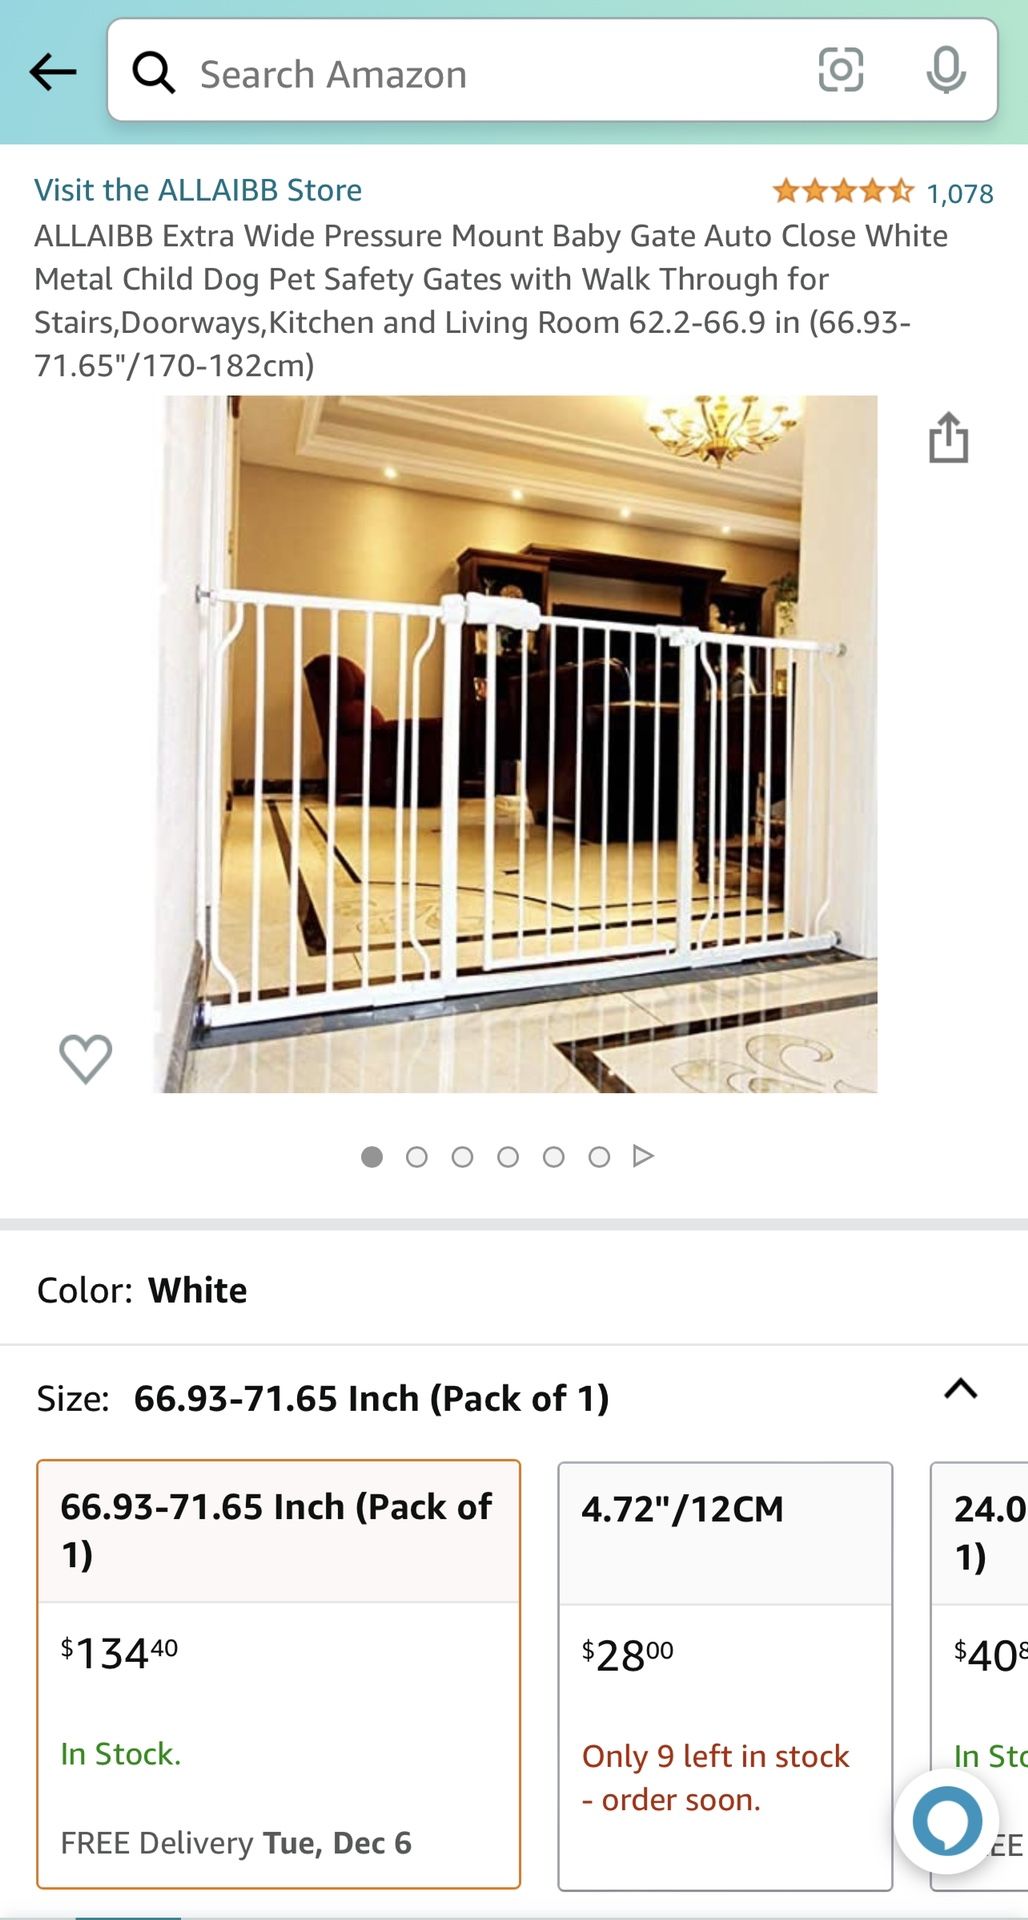 Extra Wide Pressure Mount Baby Gate Auto Close White Metal Child Dog Pet Safety Gates with Walk Through for Stairs,Doorways,Kitchen and Living Room 